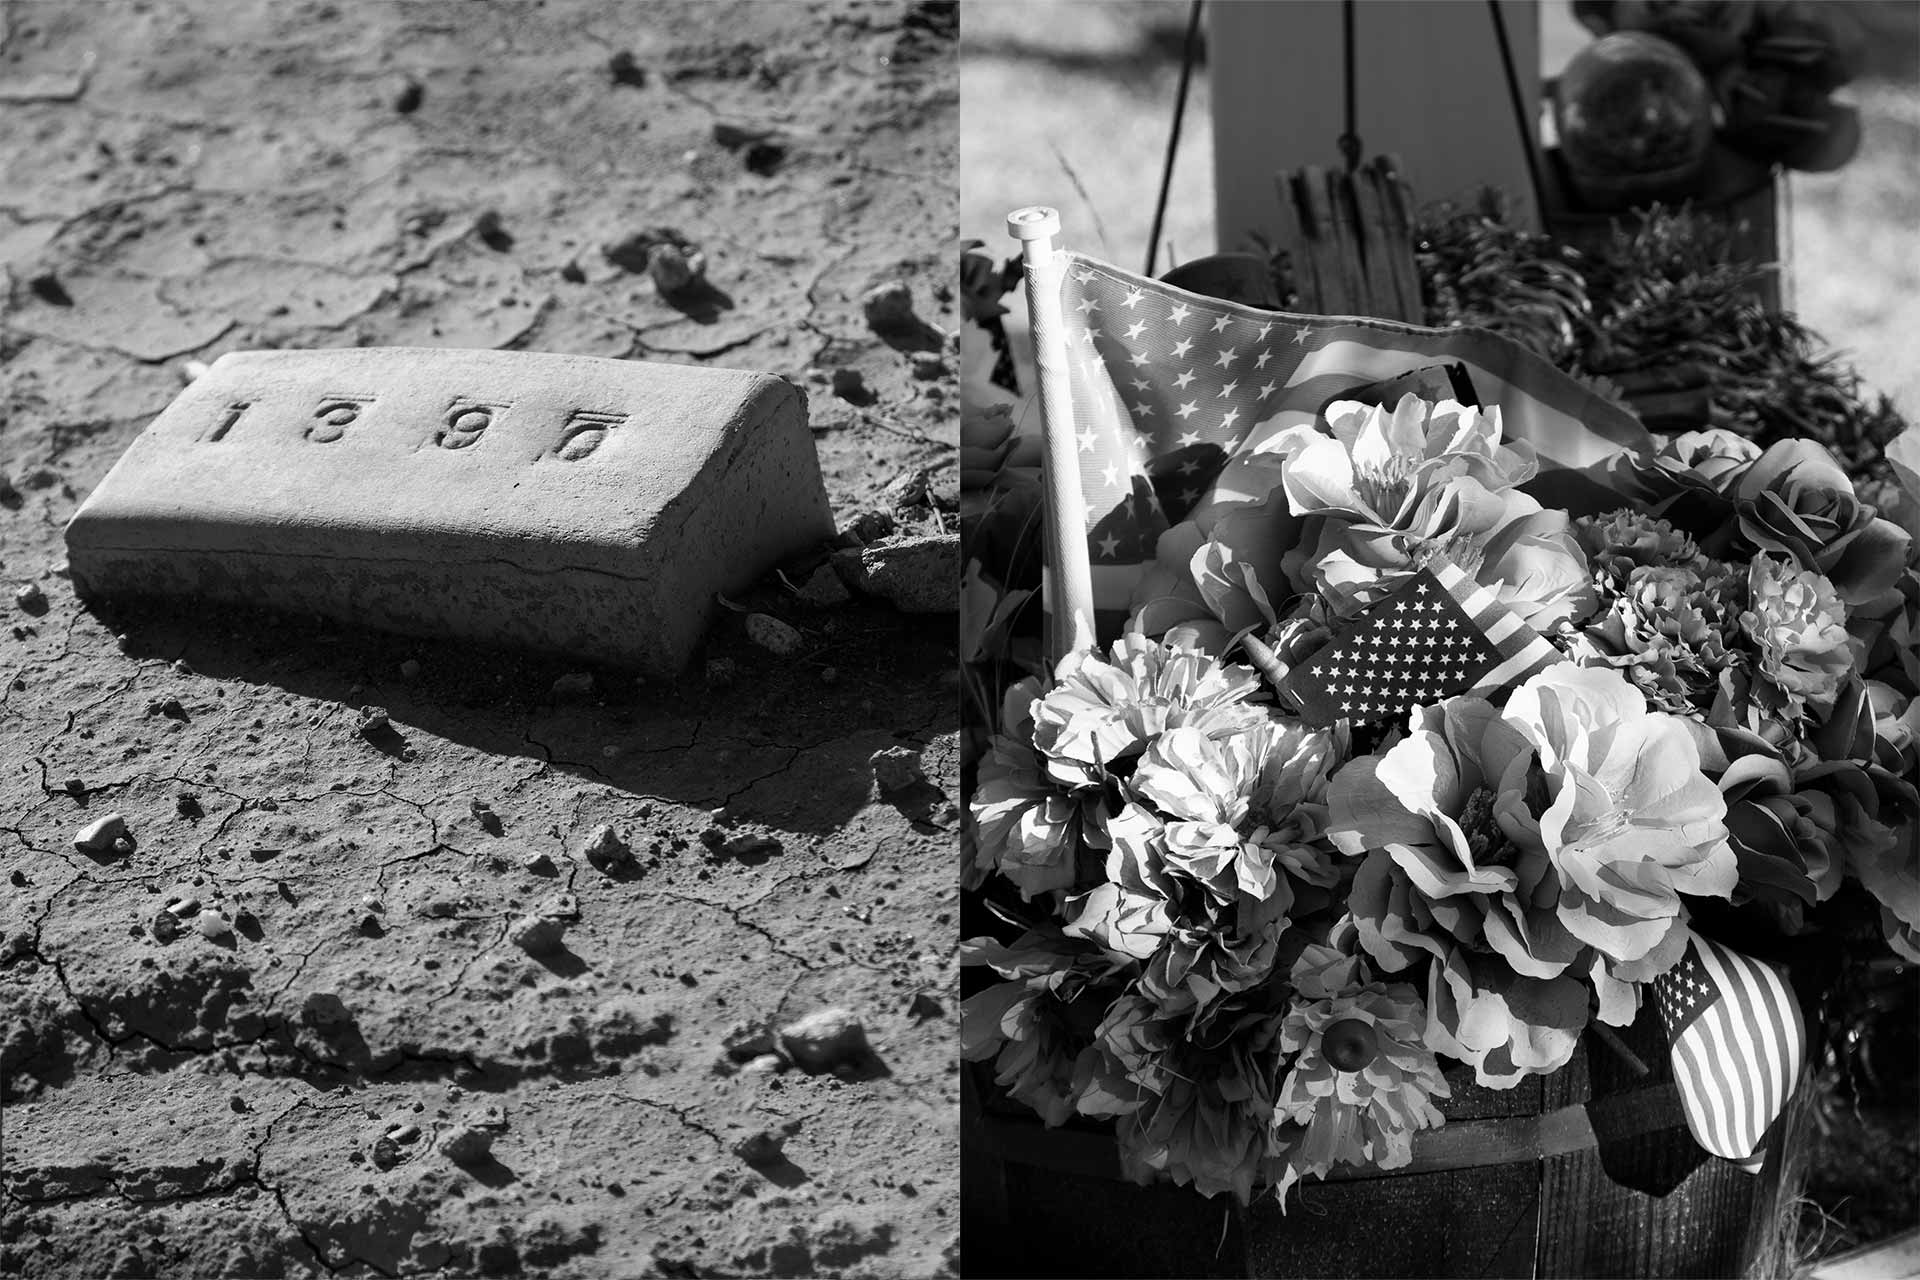 L: Small brick marks burial site of migrant, R: Flowers for a fallen BPC officer